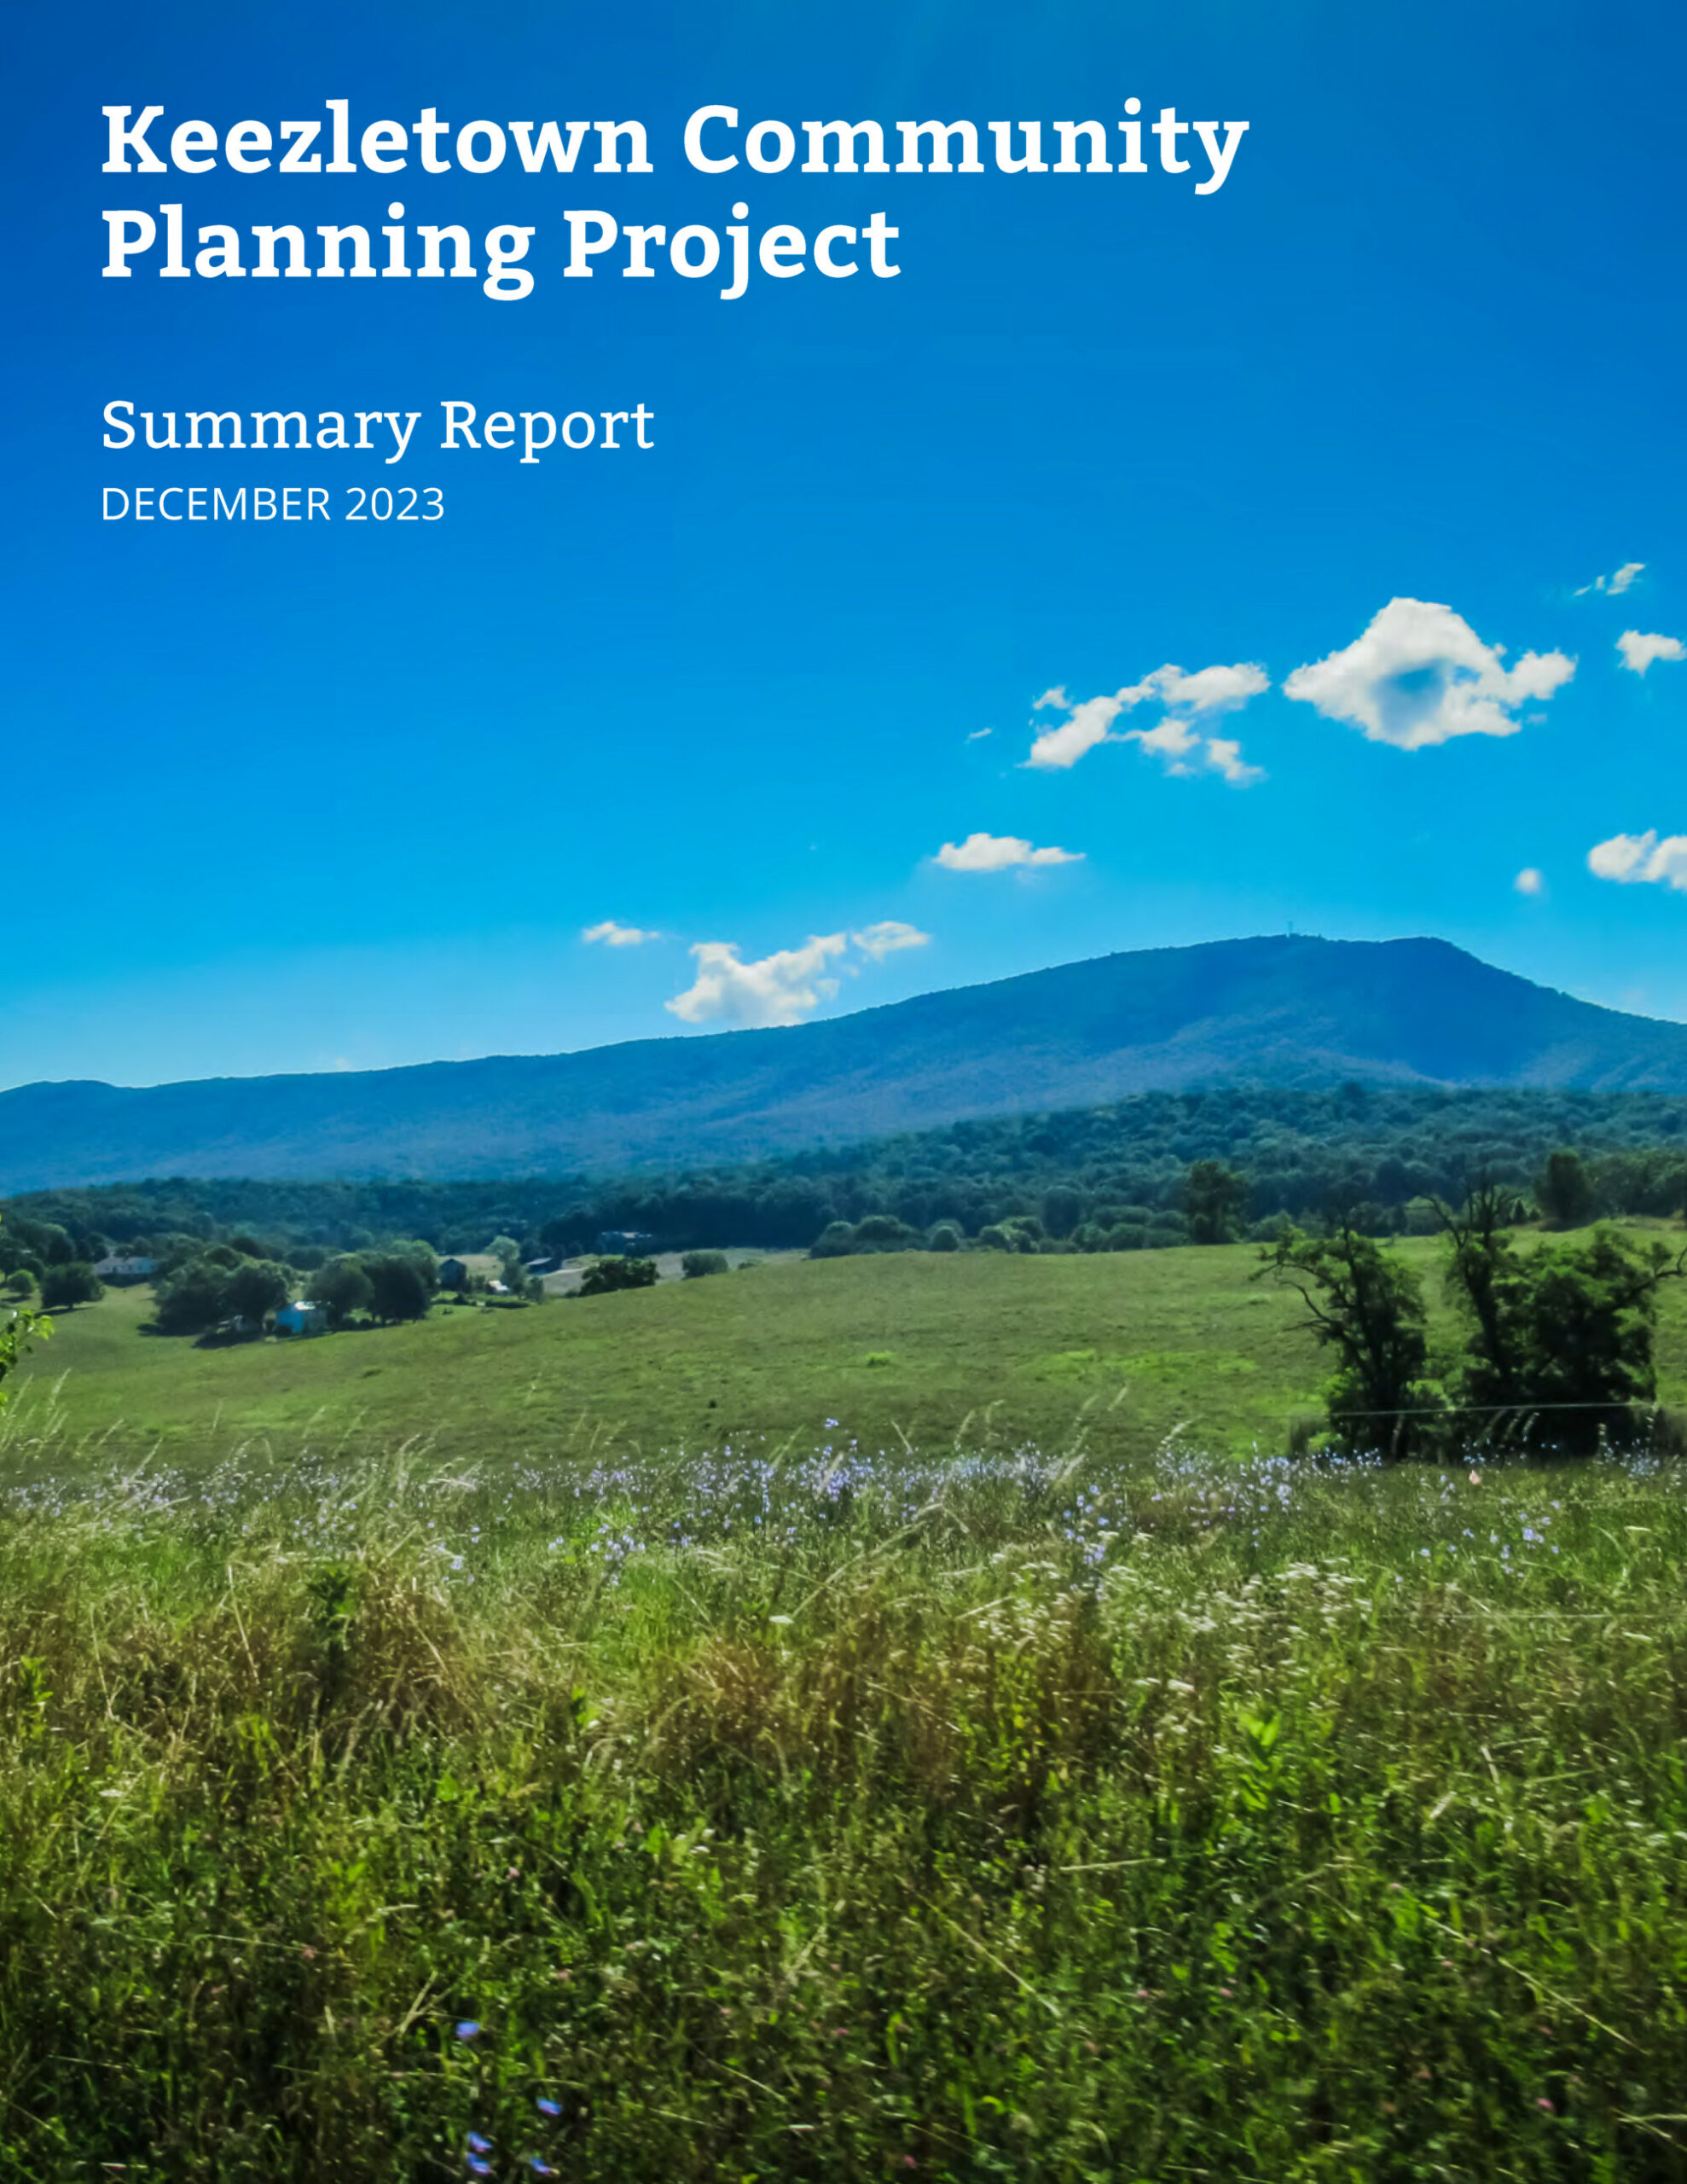 Keezletown Community Planning Project Summary Report Cover dated December 2023 with a beautiful image of a green field in the foreground and mountains in the background under a blue sky.